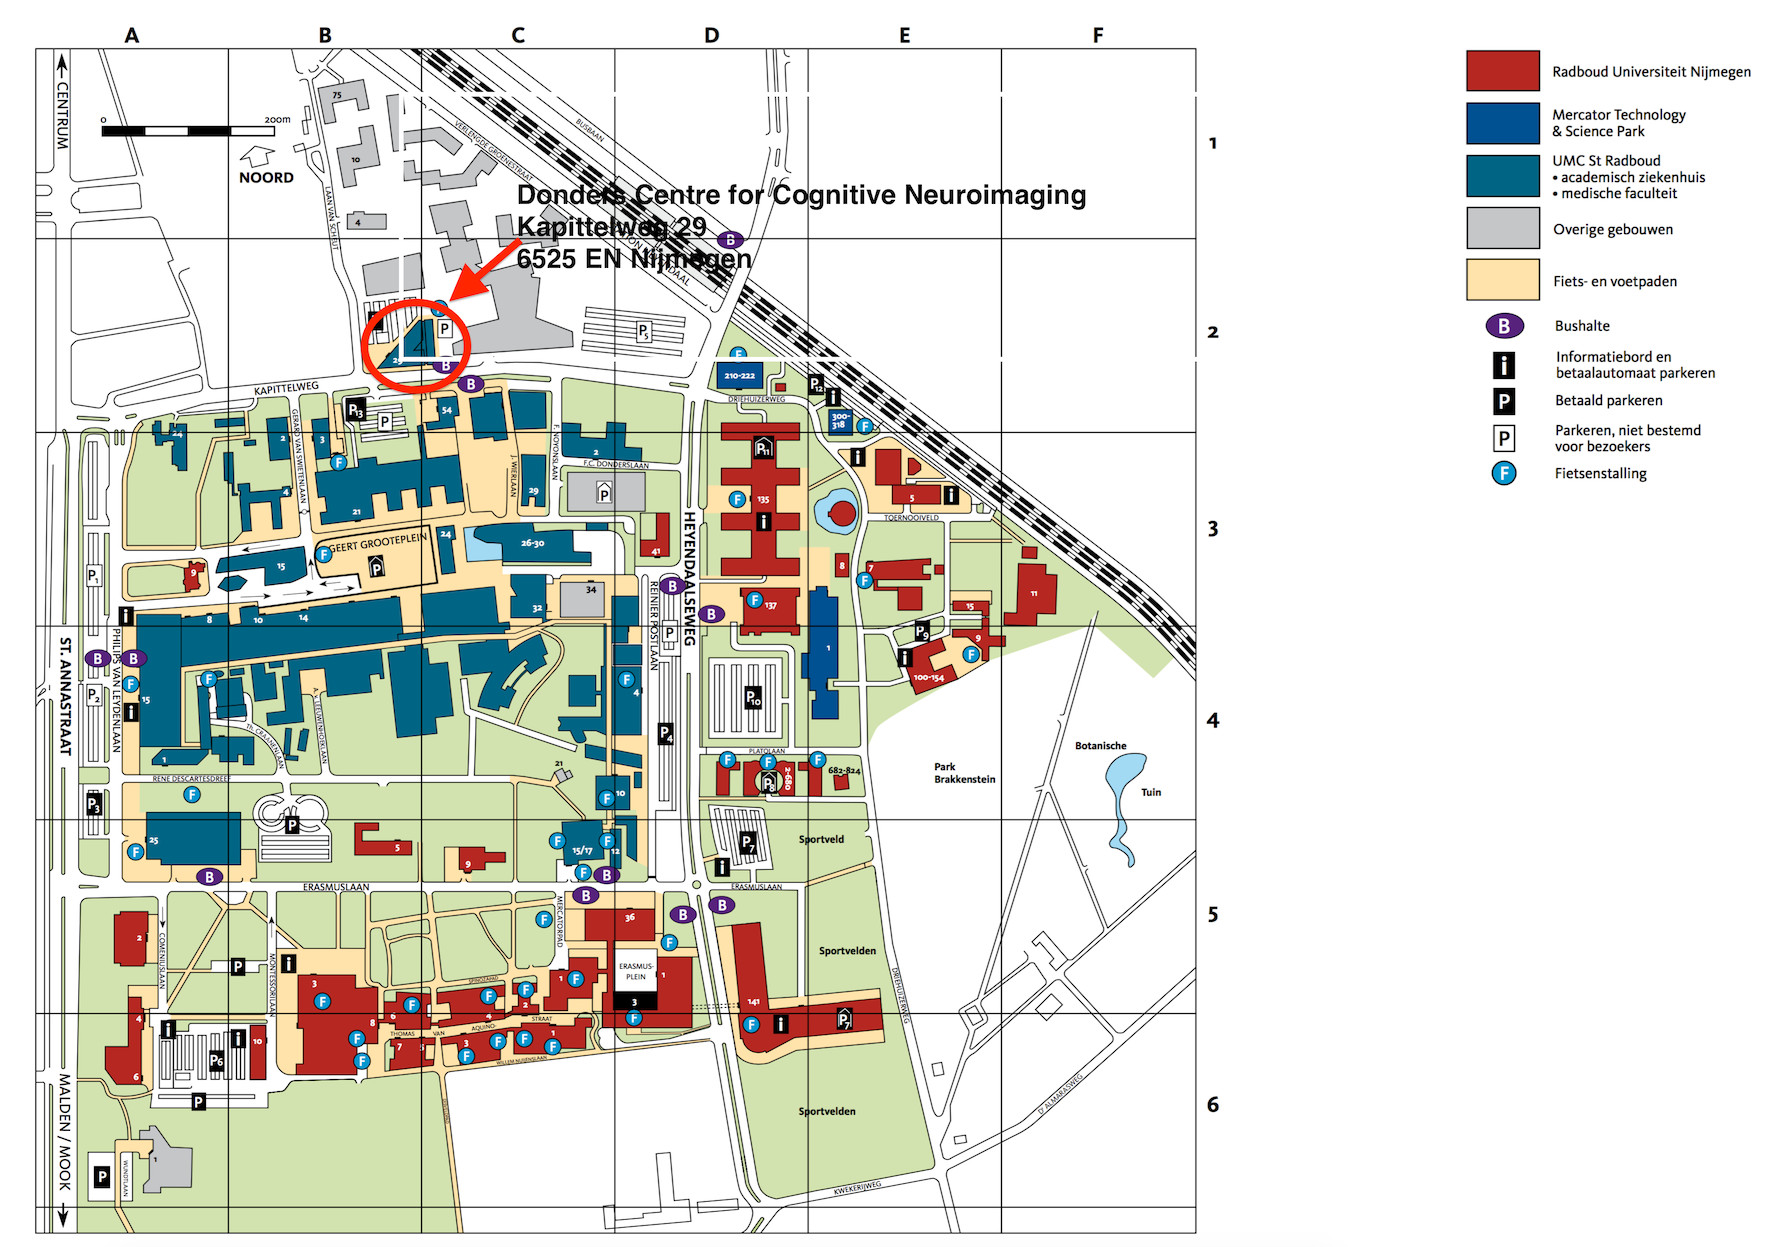 [Image: Map of Campus]